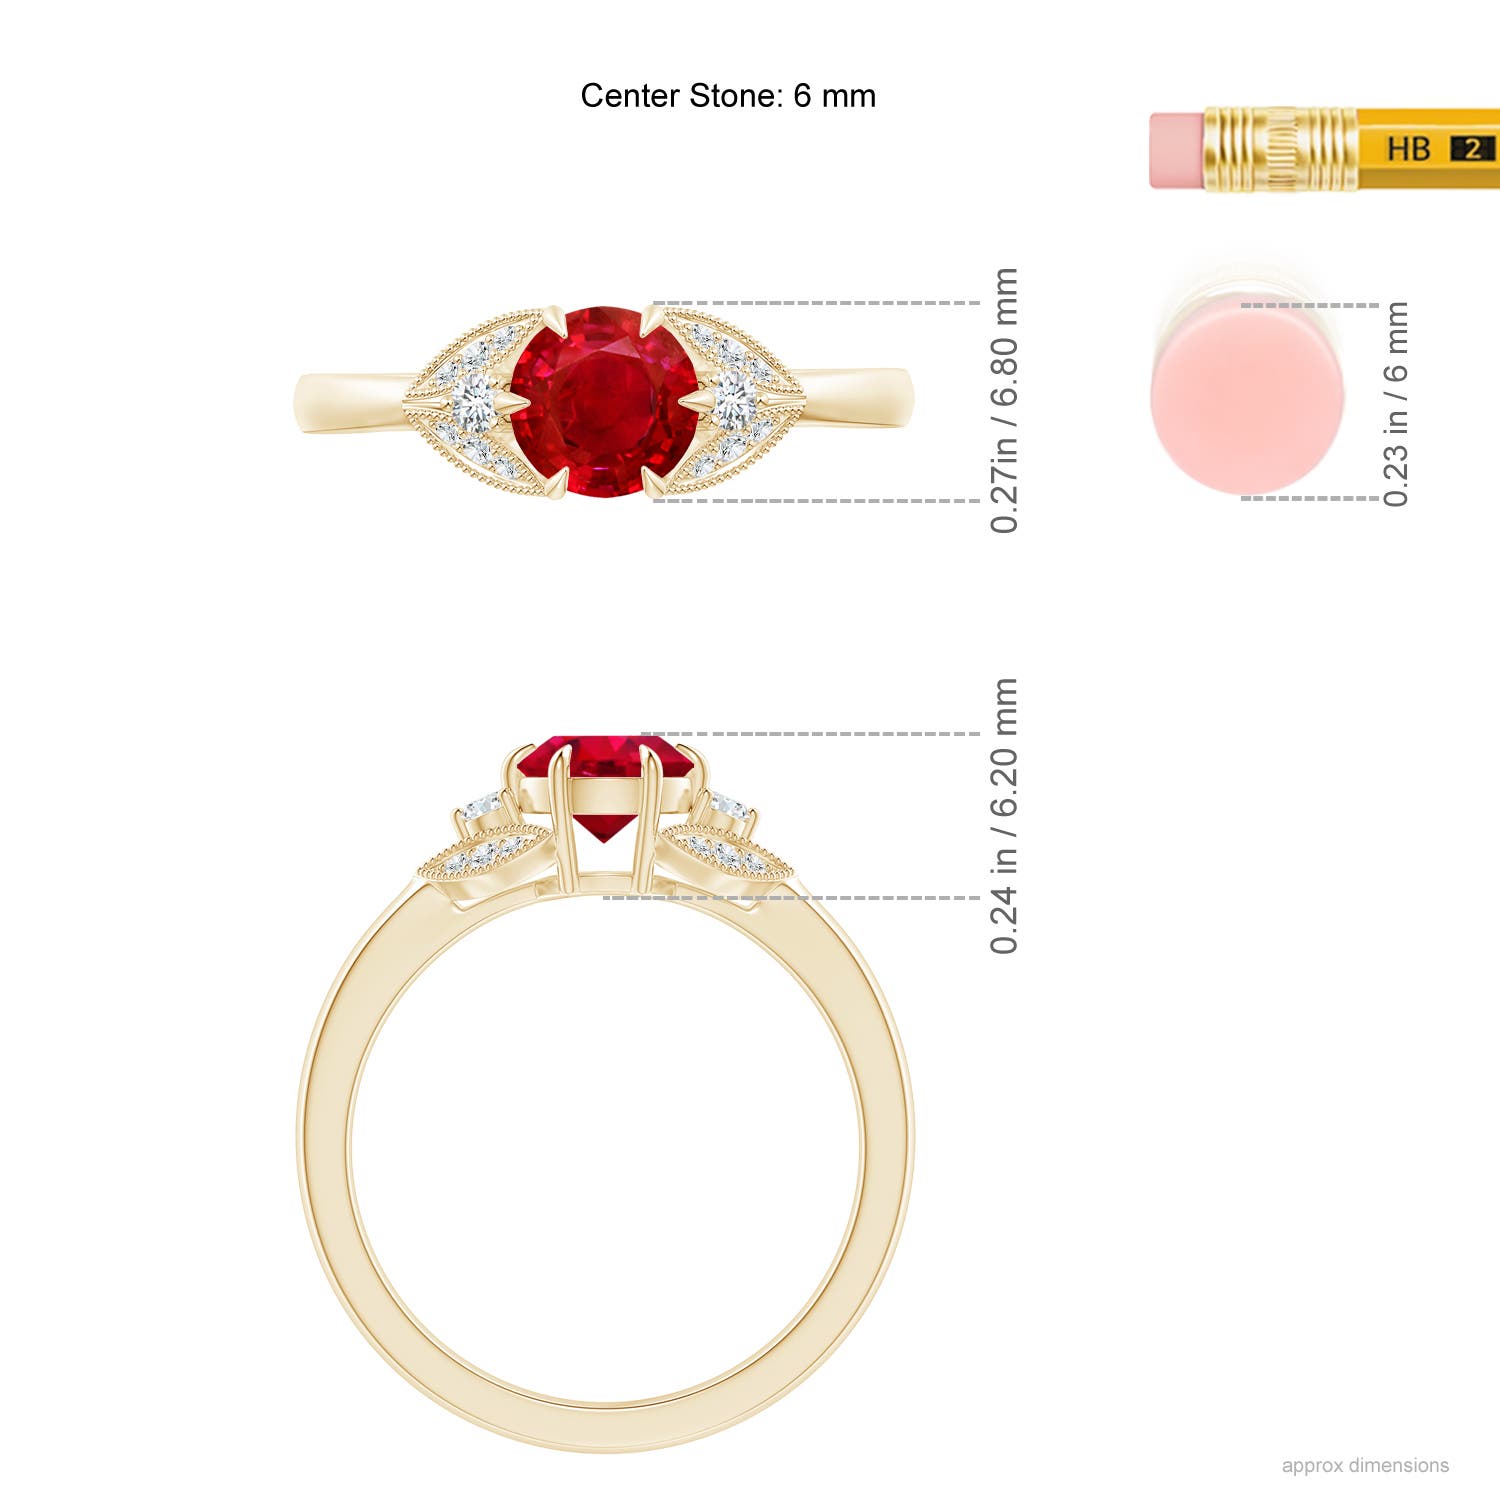 AAA - Ruby / 1.1 CT / 14 KT Yellow Gold